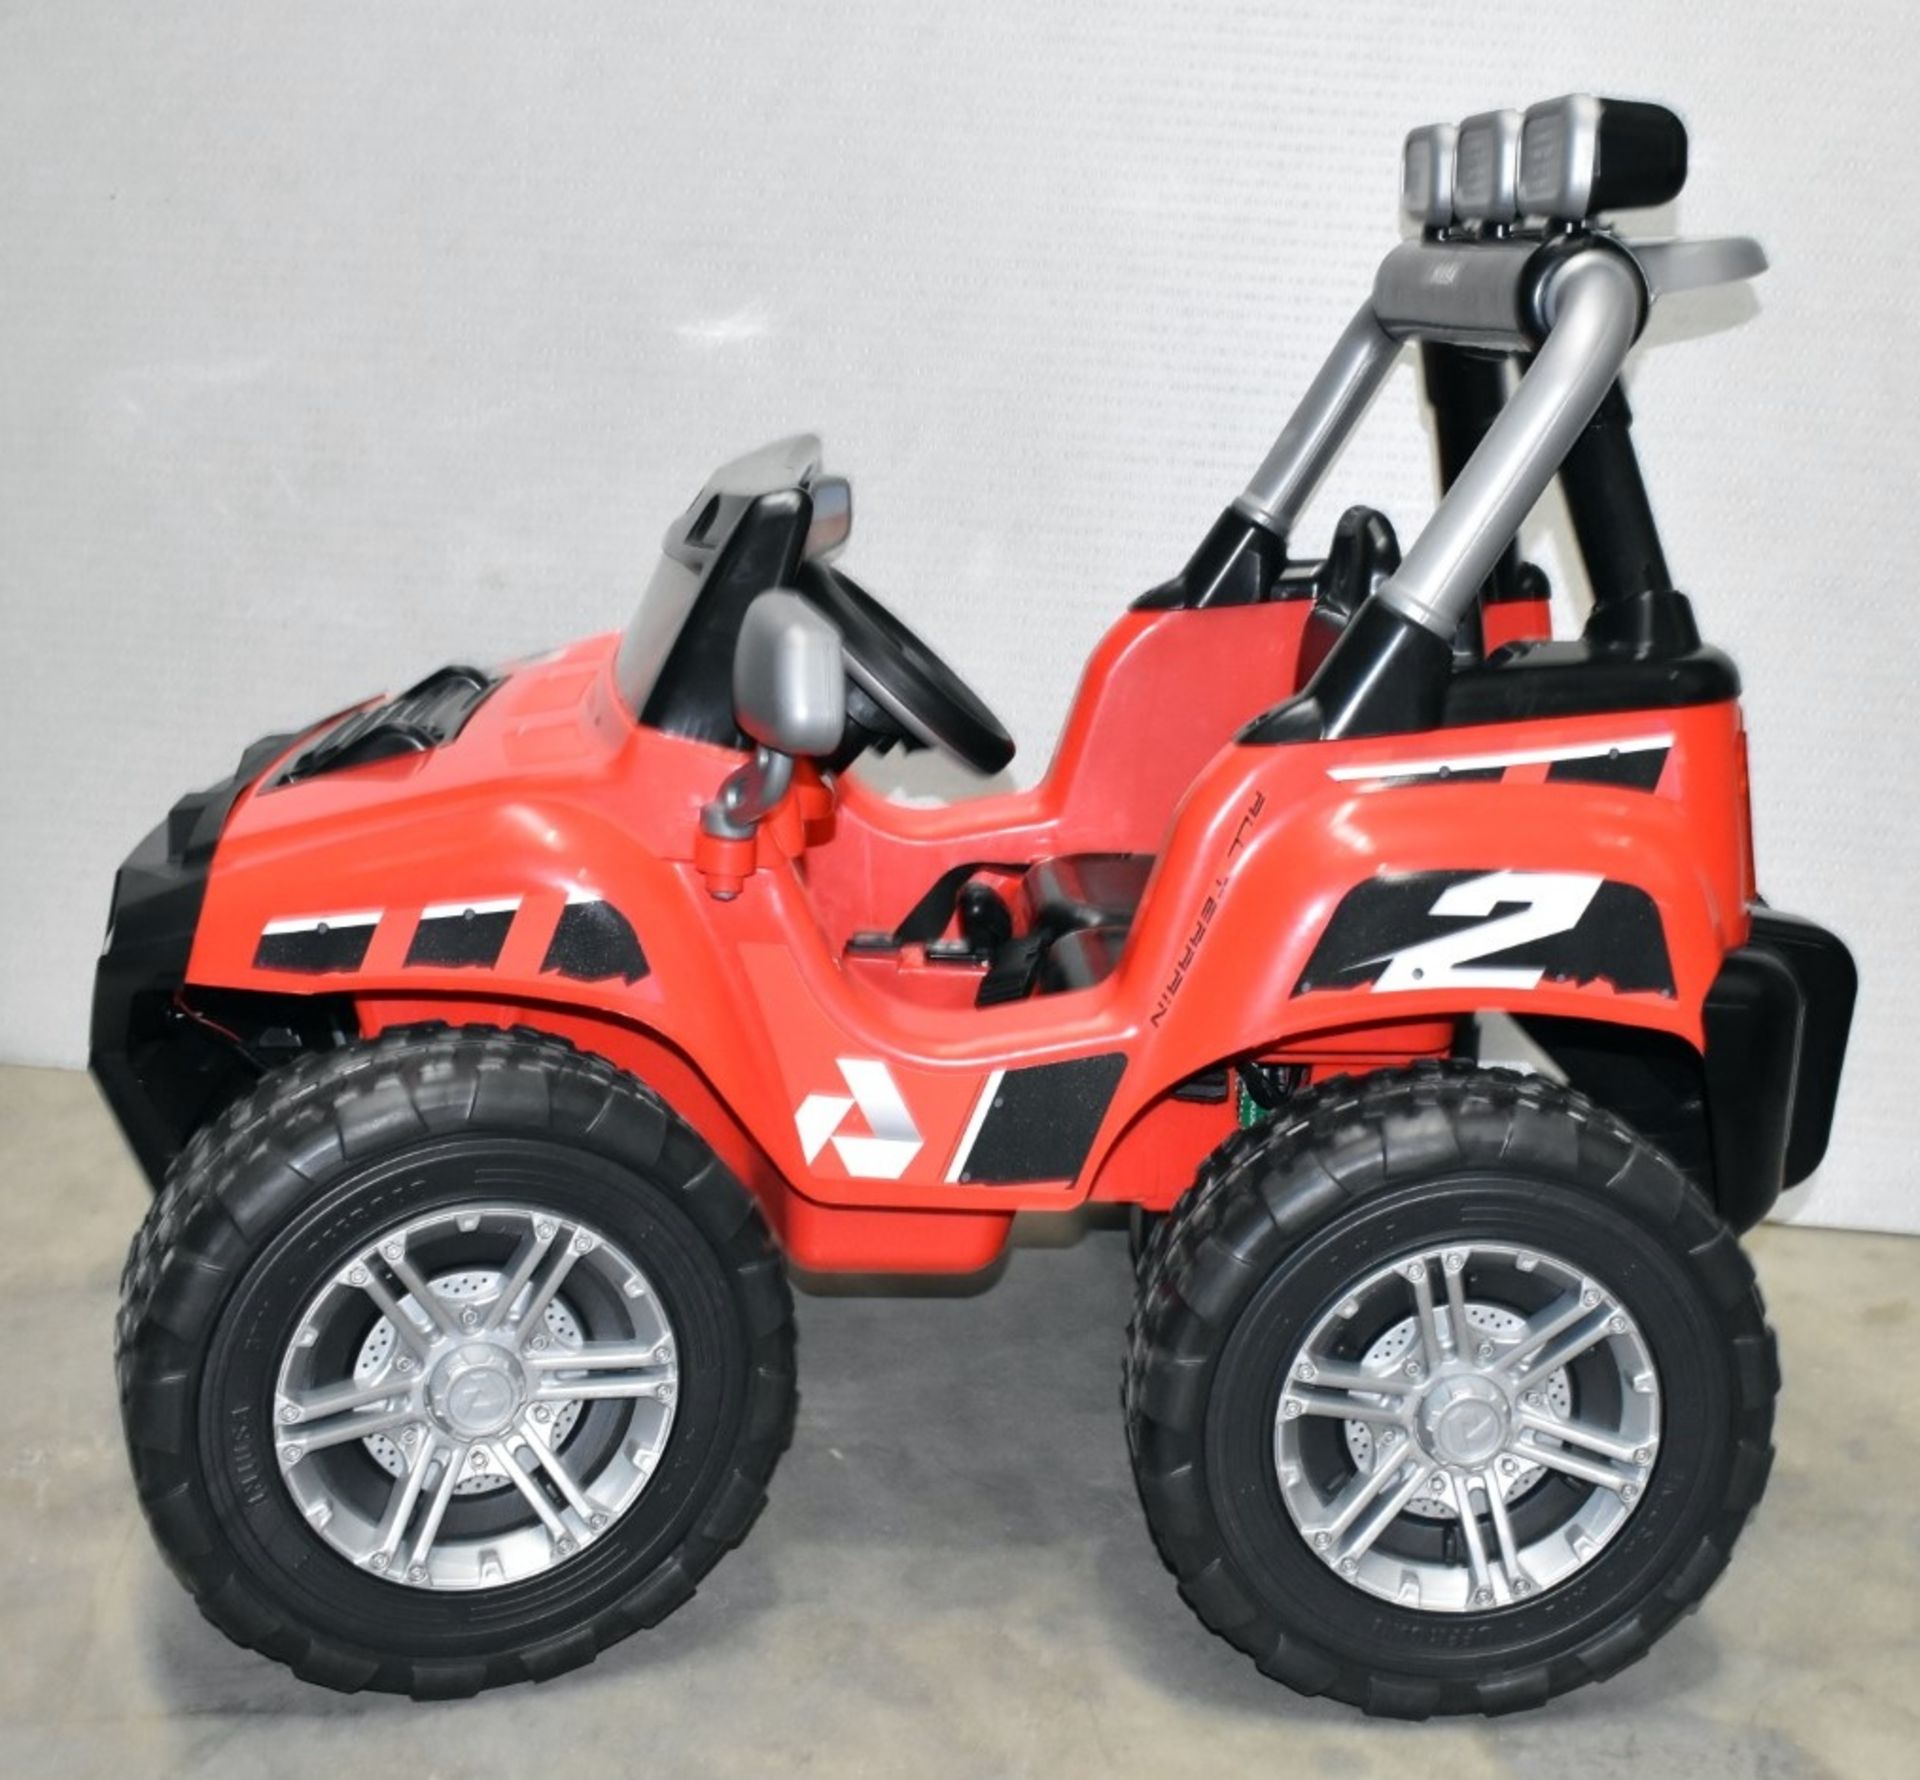 1 x INJUSA 'Monster' Child's 24v Ride-On Toy Car - UK Exclusive Model - Original RRP £450.00 - Image 4 of 13